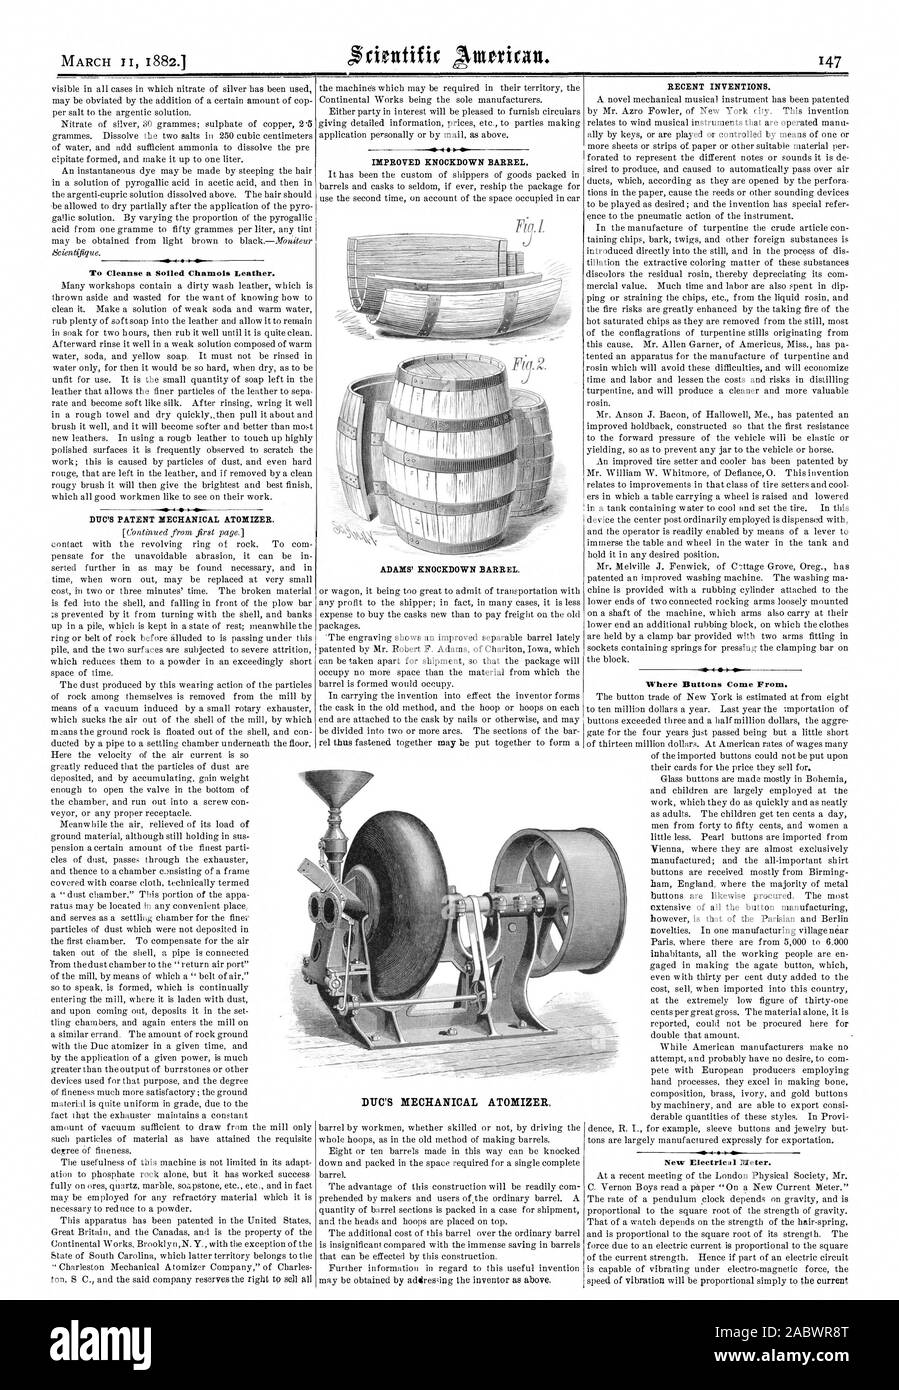 To Cleanse a Soiled Chamois Leather. D17C'S PATENT MECHANICAL ATOMIZER. IMPROVED KNOCKDOWN BARREL. ADAMS' KNOCKDOWN BARREL. RECENT INVENTIONS. Where Buttons Come From. New Electrical Pieter. DUC'S MECHANICAL ATOMIZER., scientific american, 1882-03-11 Stock Photo